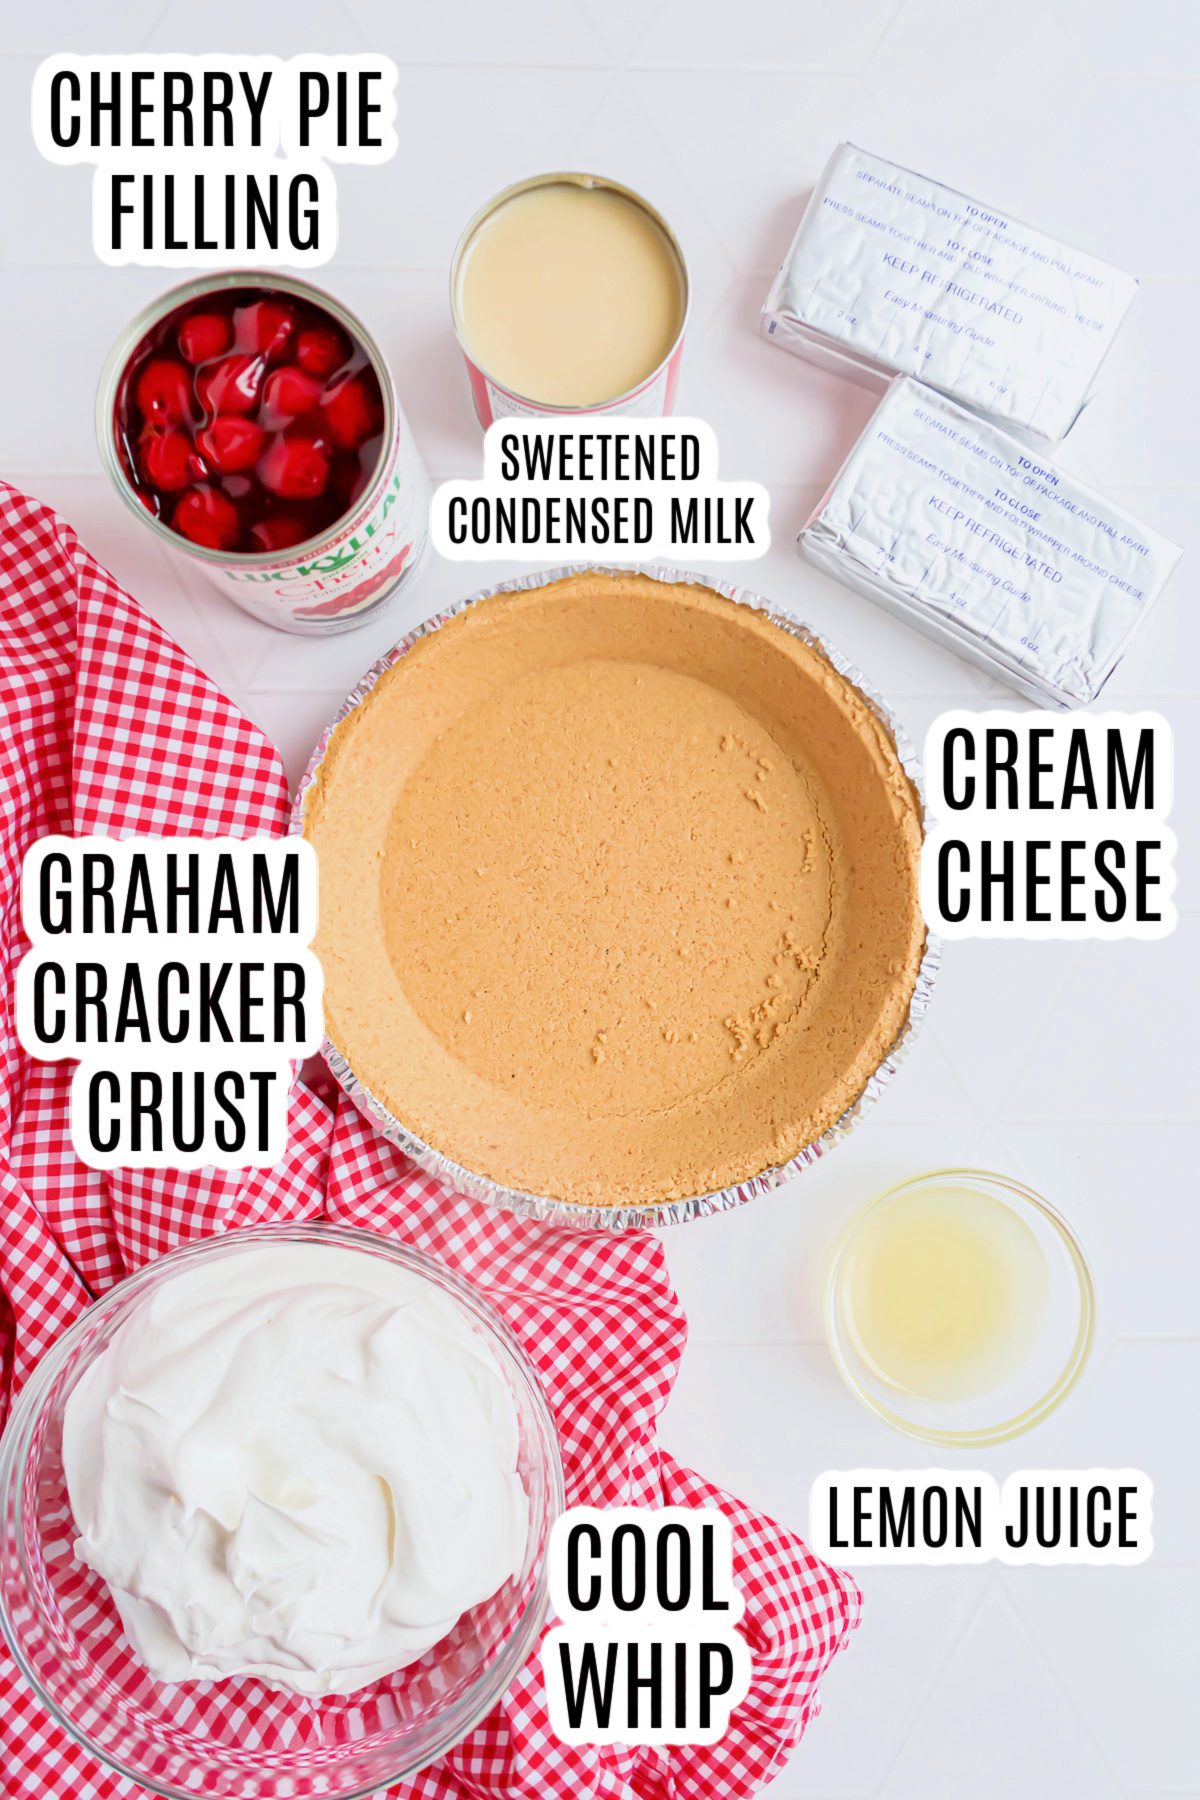 All the ingredients that are needed to make the no bake cherry pie with graham cracker crust, including a pre-made graham cracker crust, cream cheese, sweetened condensed milk, cherry pie filling, lemon juice, and cool whip.